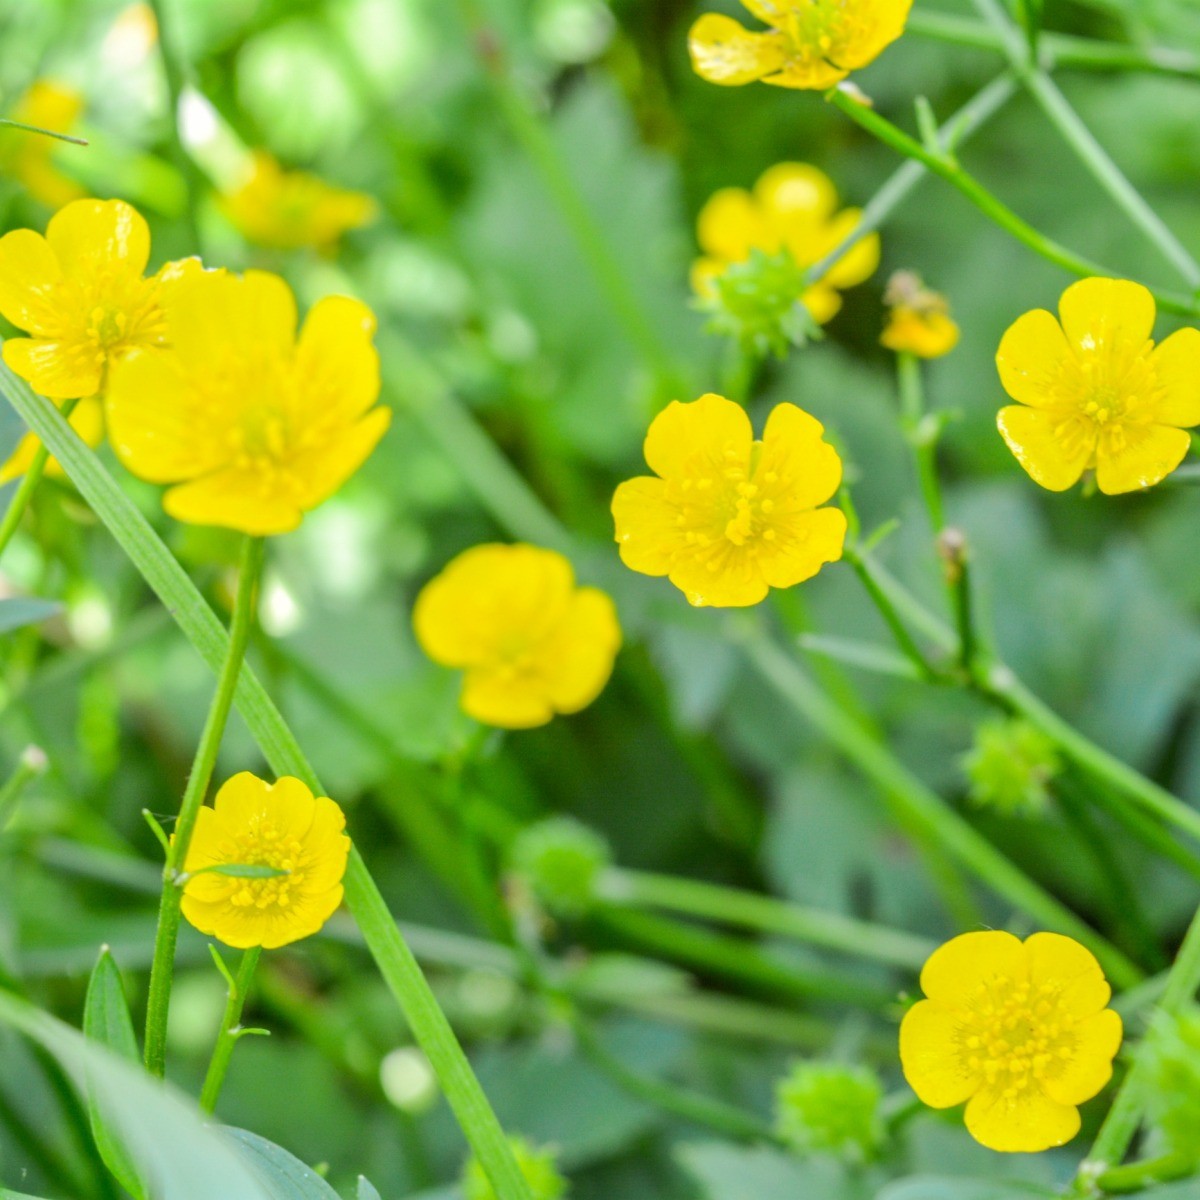 buttercup plant poisonous to dogs